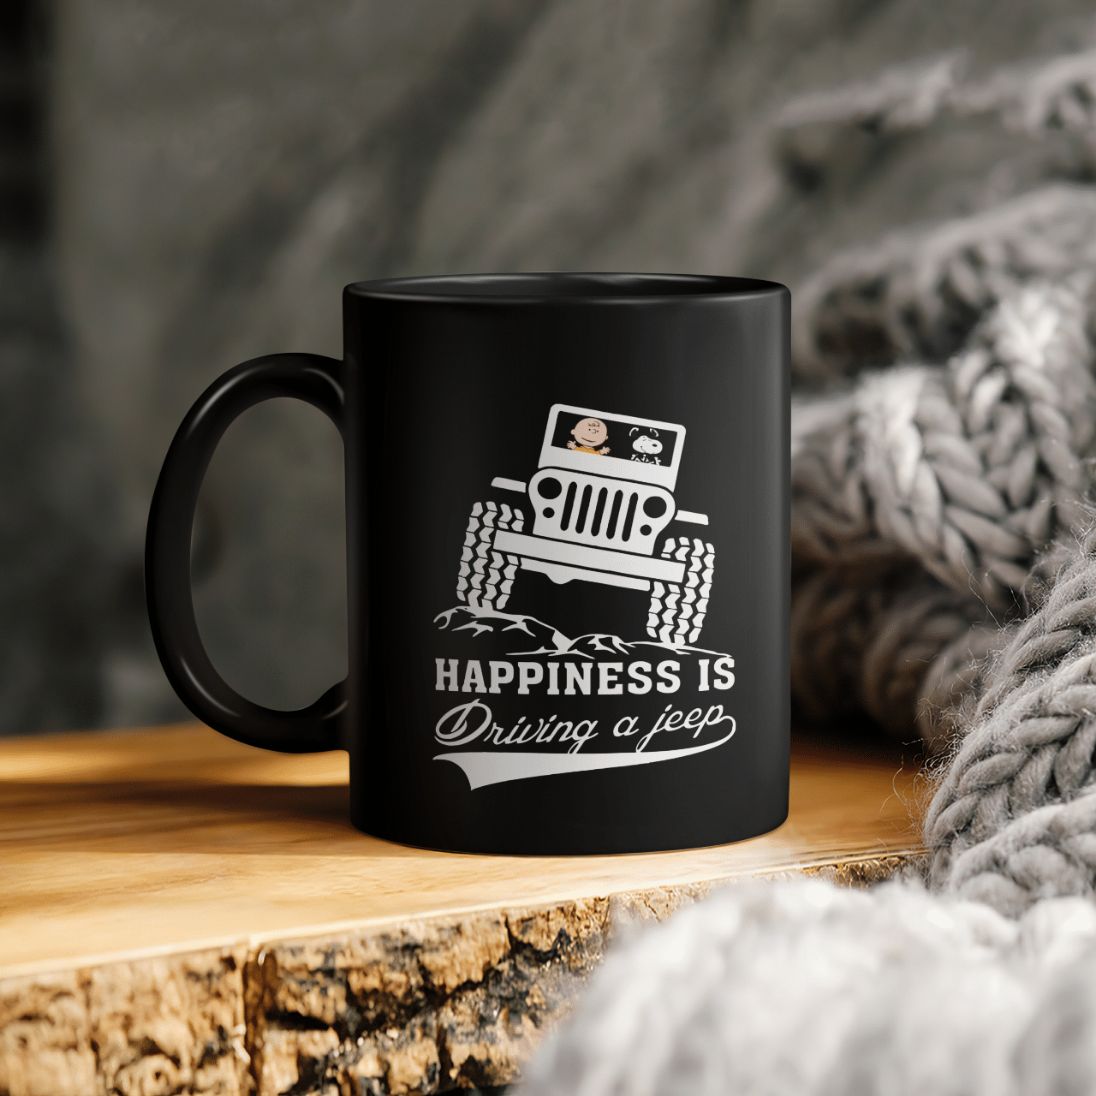 https://teepital.com/wp-content/uploads/2022/04/jeep-lover-happiness-is-driving-a-jeep-ceramic-coffee-mughoafq.jpg